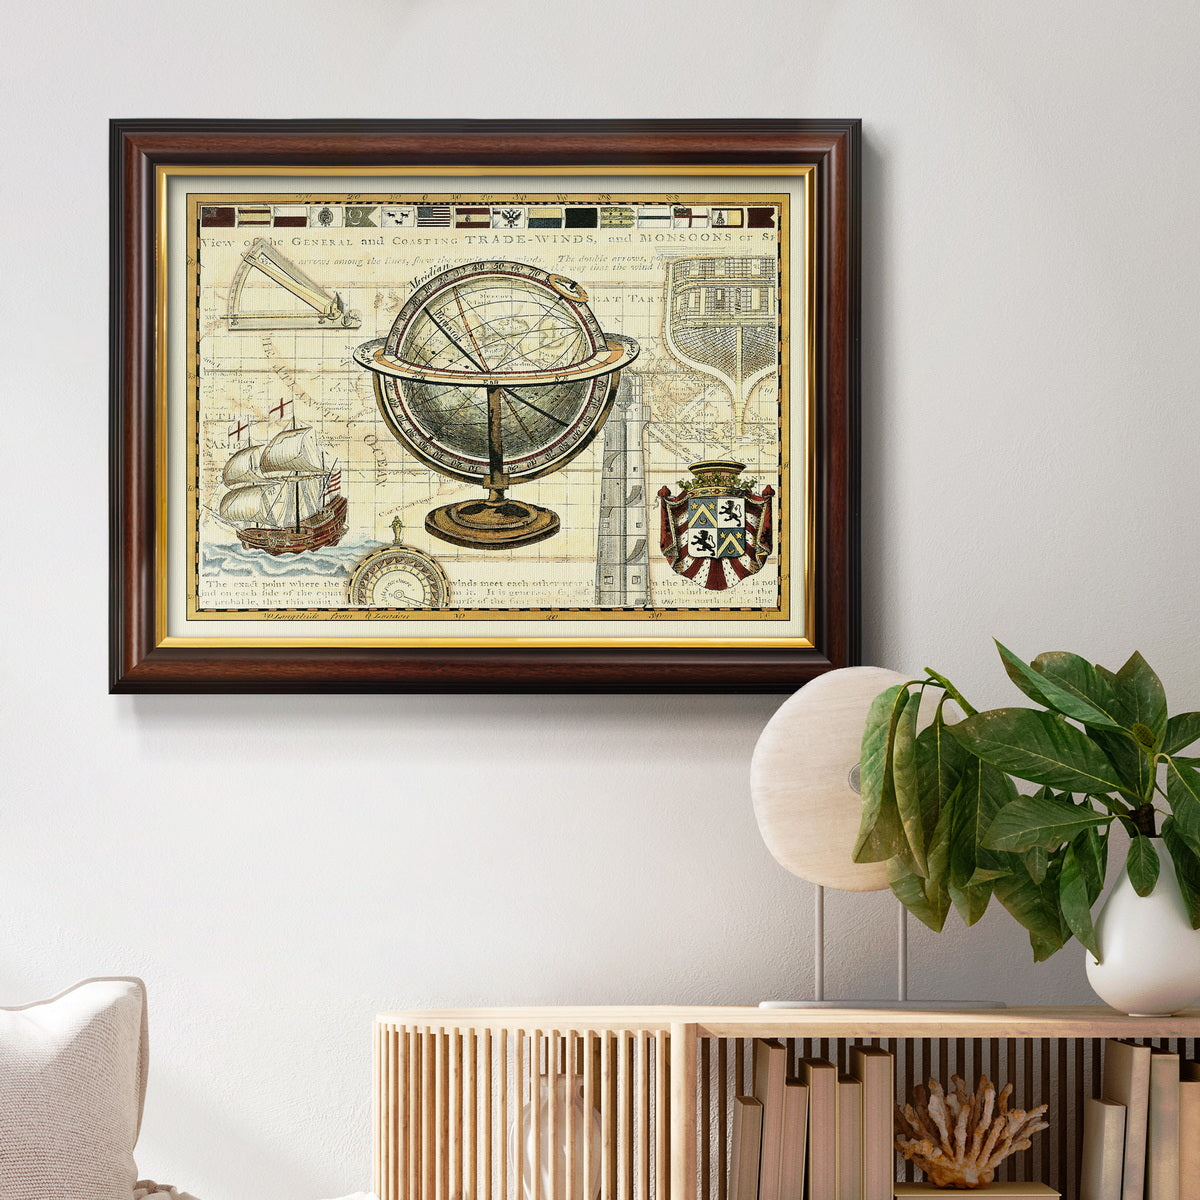 Nautical Map II Premium Framed Canvas- Ready to Hang